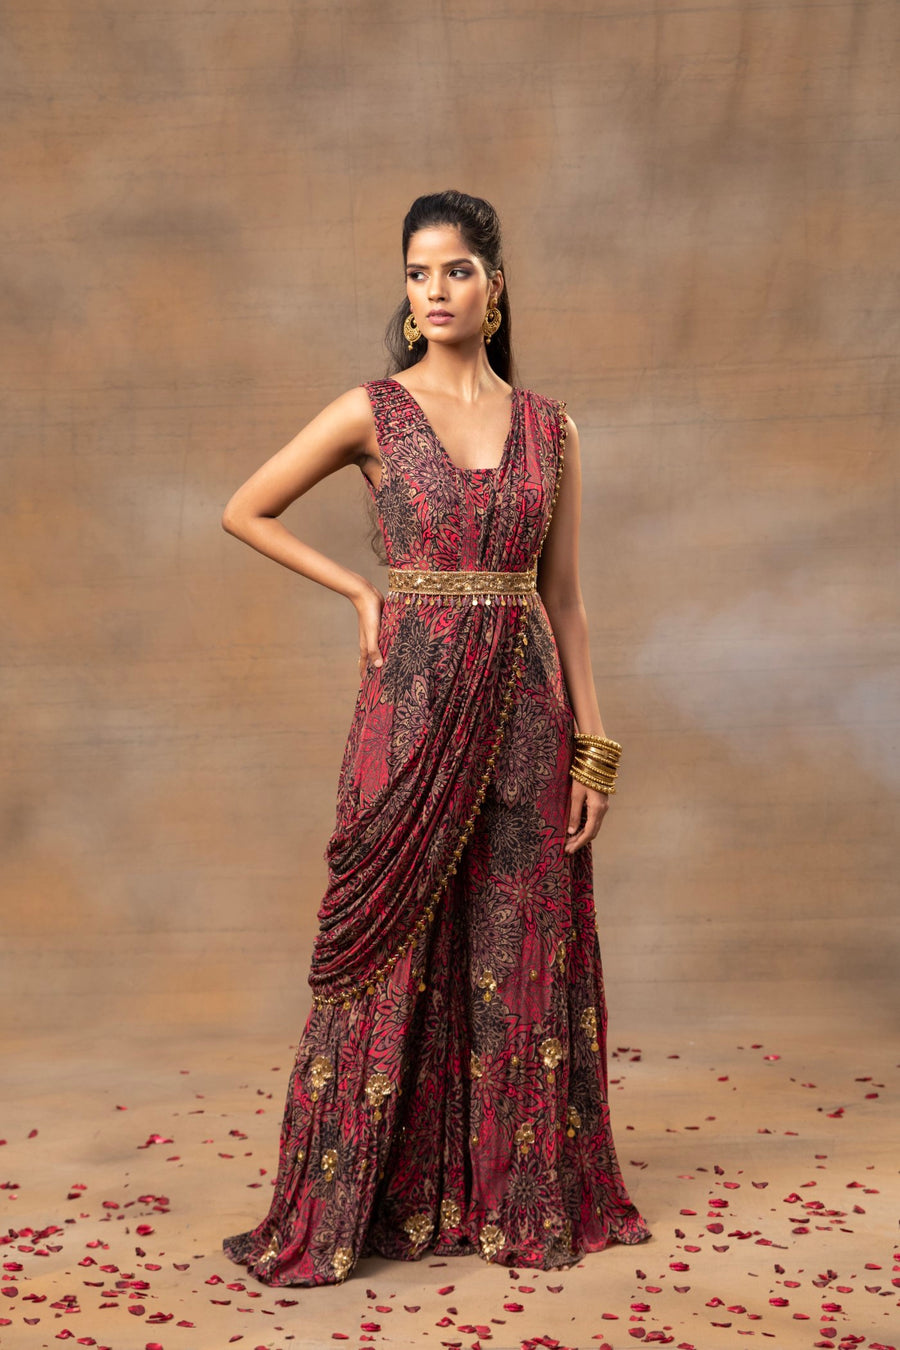 Pink Printed Jumpsuit, Drape And Belt With Embroidery